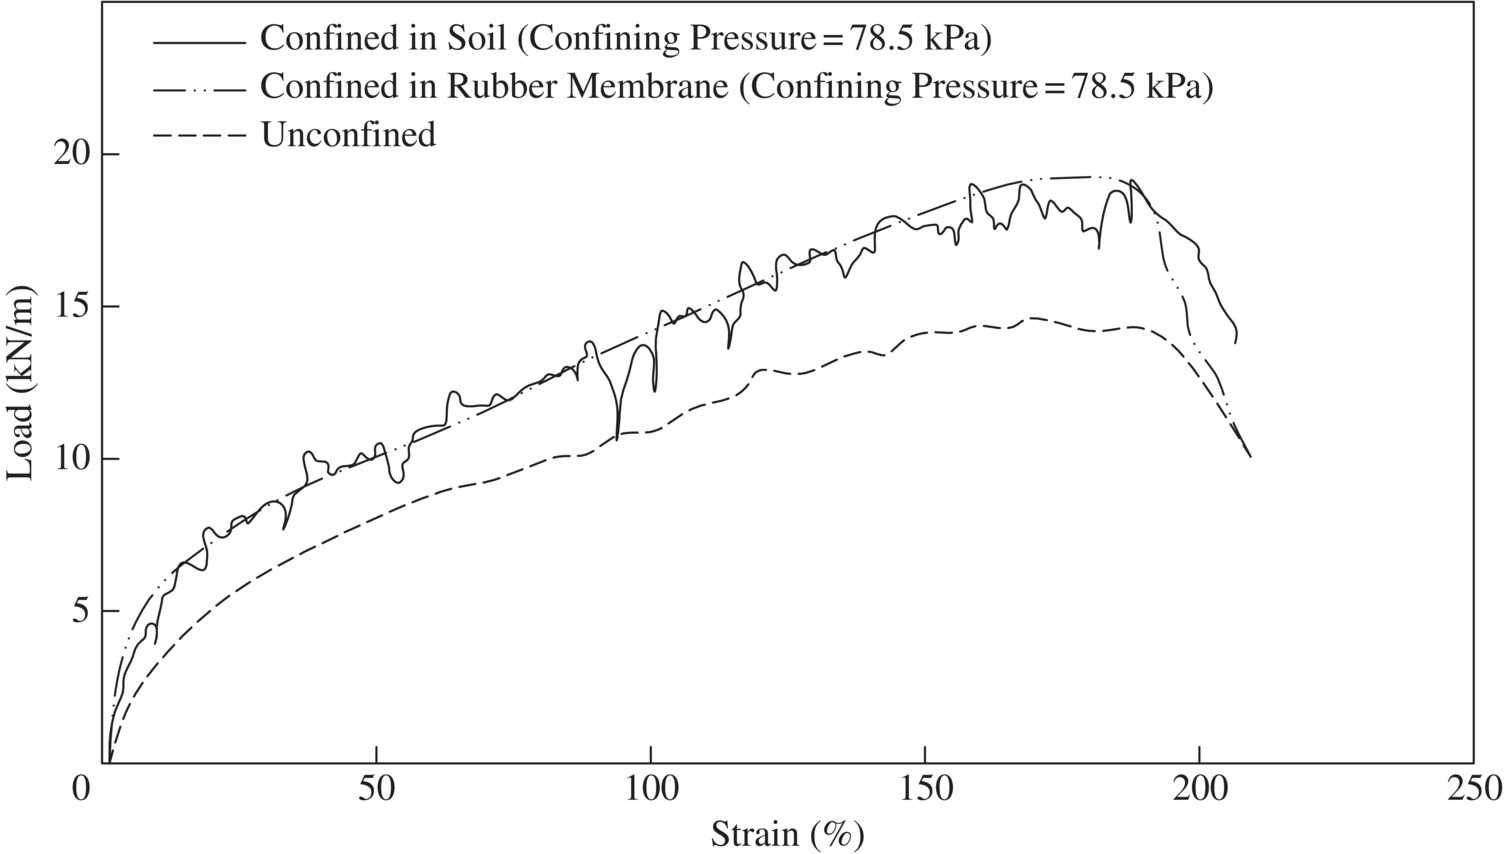 Graph of load–deformation relationships of a nonwoven needle‐punched geotextile, displaying 3 ascending curves representing confined in soil, confined in rubber membrane, and unconfined.